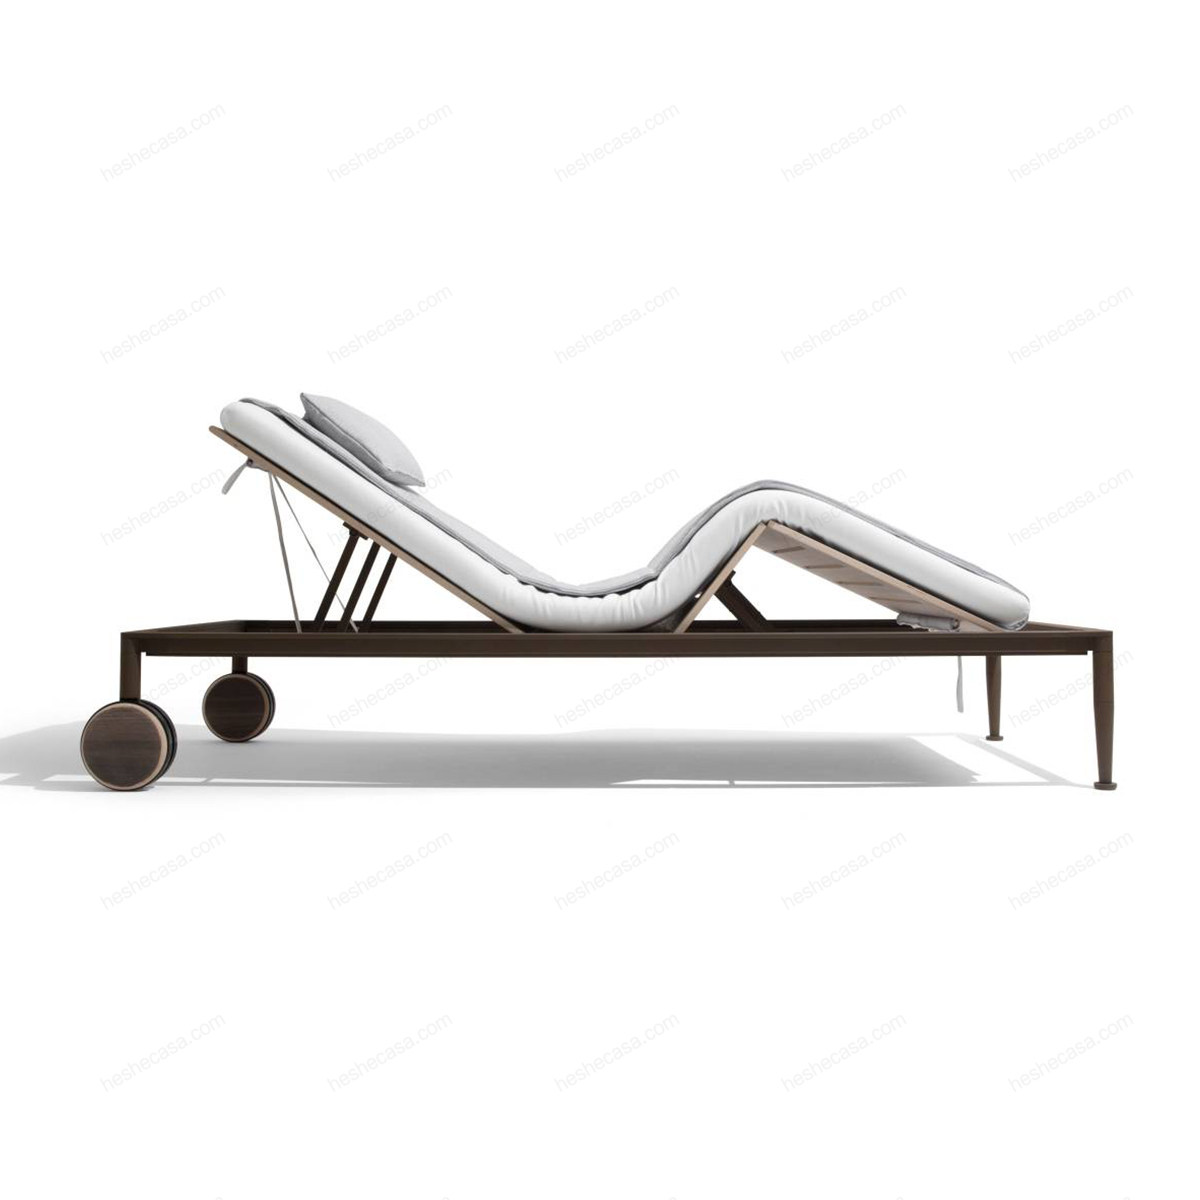 fora-chaise-lounge躺椅